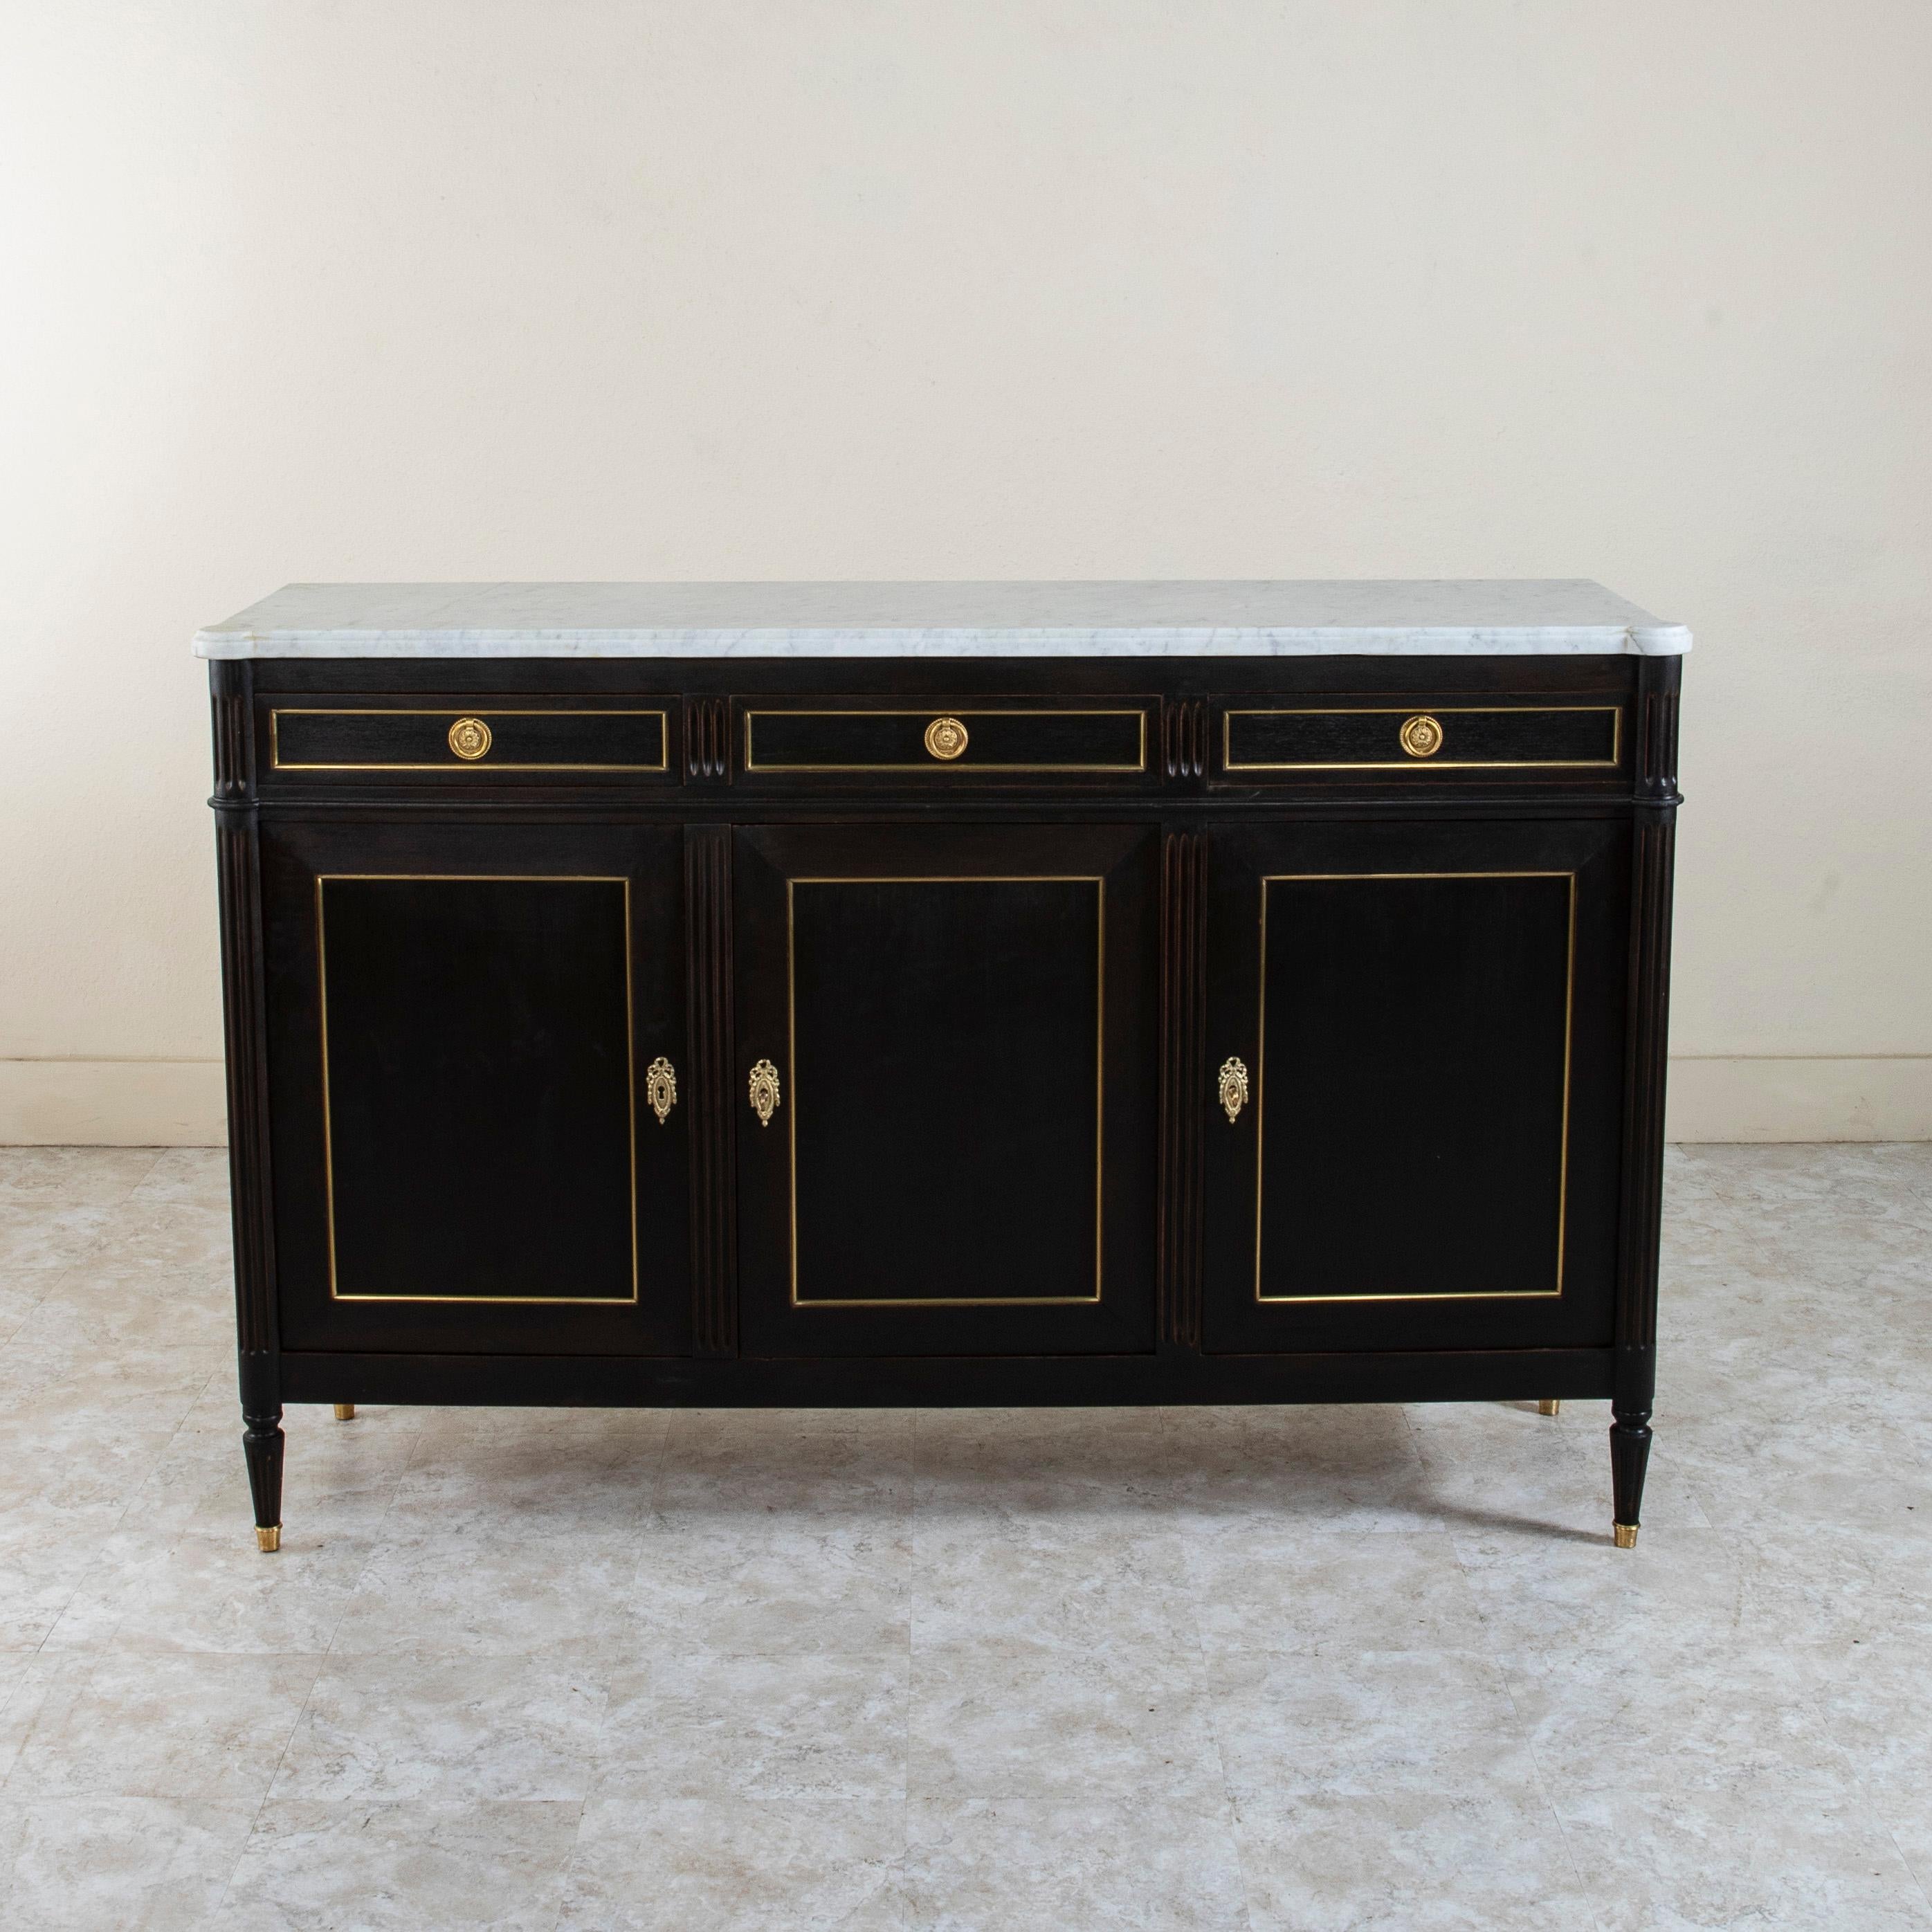 This early twentieth century French Louis XVI style enfilade or sideboard features a black painted mahogany cabinet with a white beveled marble top. Stunning bronze banding outlines each door and drawer, while fluted columns define the facade. Its